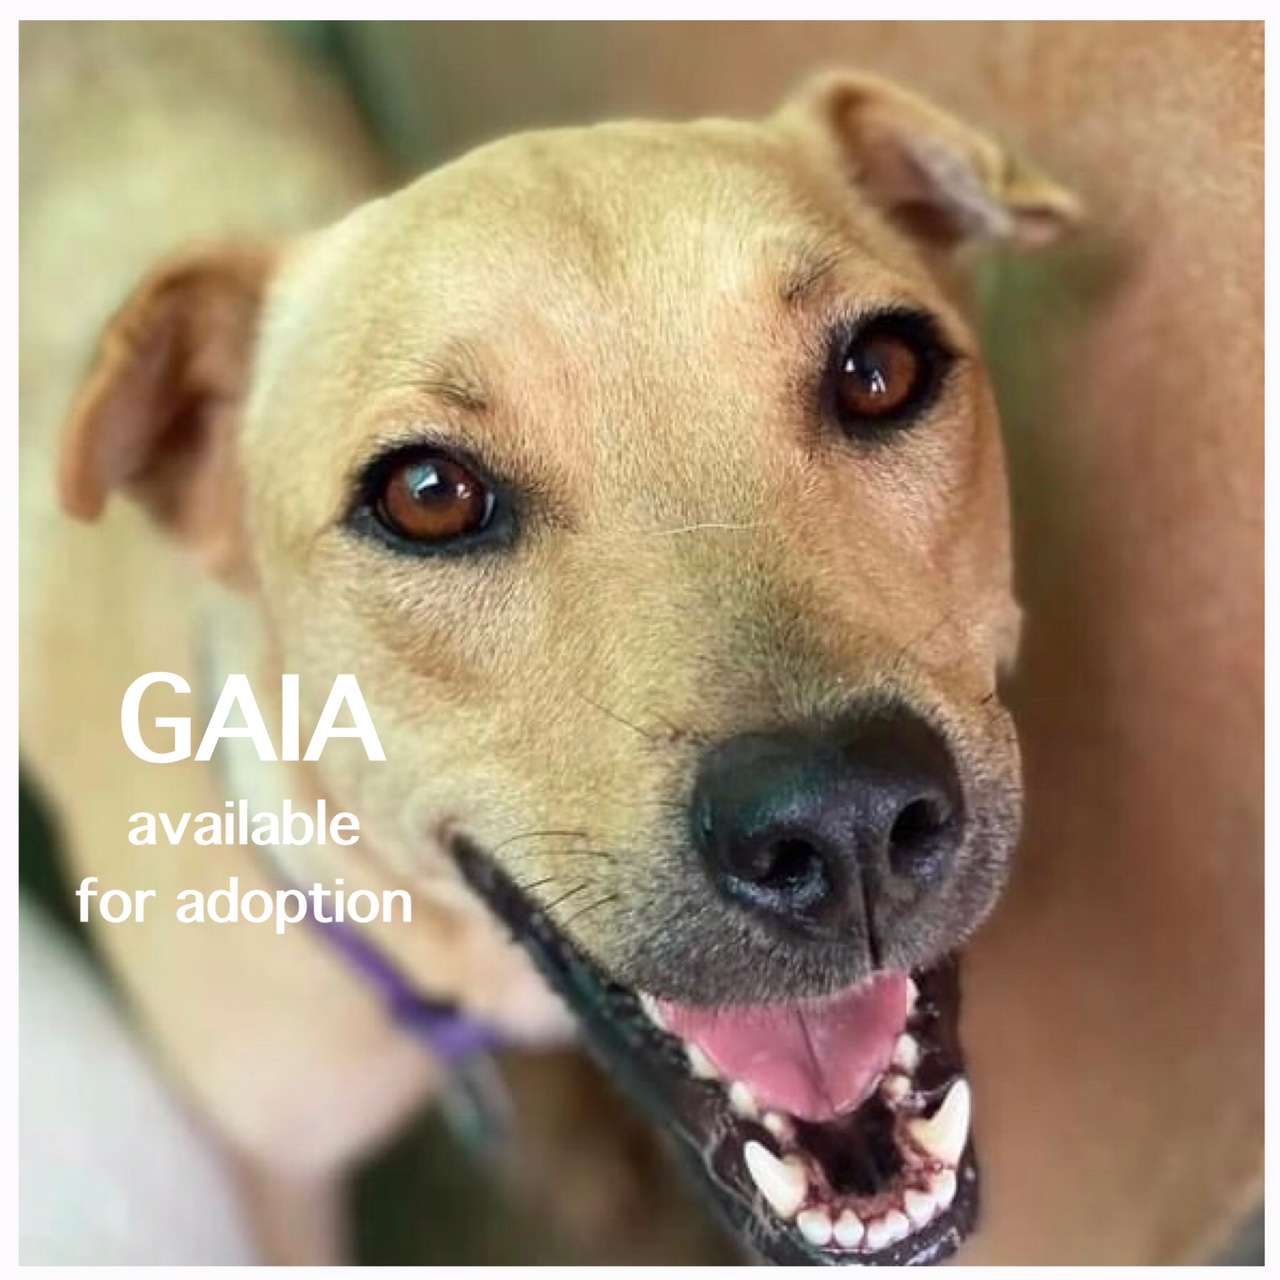 Cats and Dogs Need Your Help - Gaia